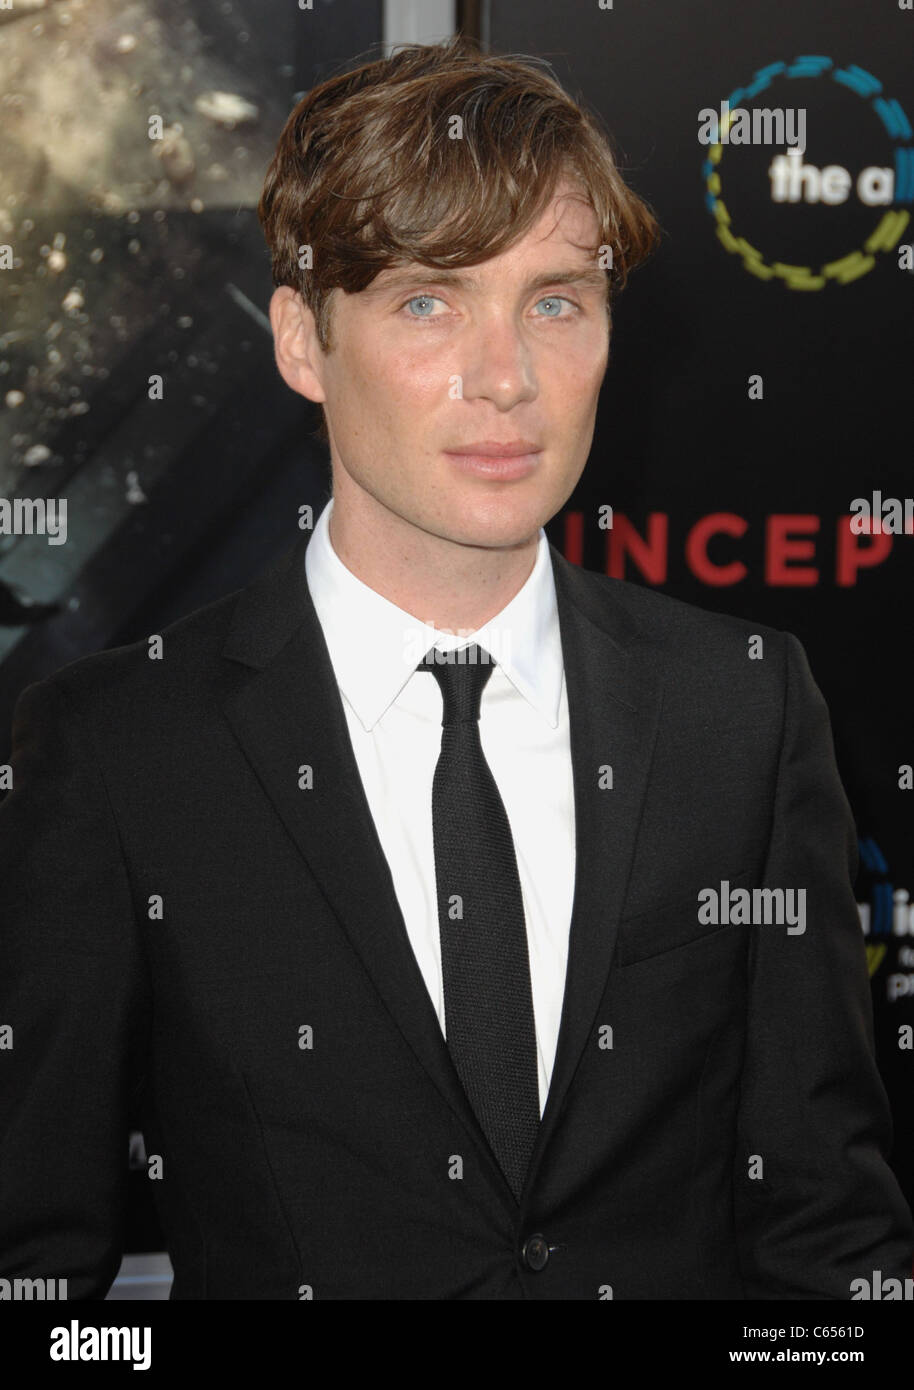 Cillian Murphy at arrivals for INCEPTION Premiere, Grauman's Chinese Theatre, Los Angeles, CA July 13, 2010. Photo By: Dee Cercone/Everett Collection Stock Photo